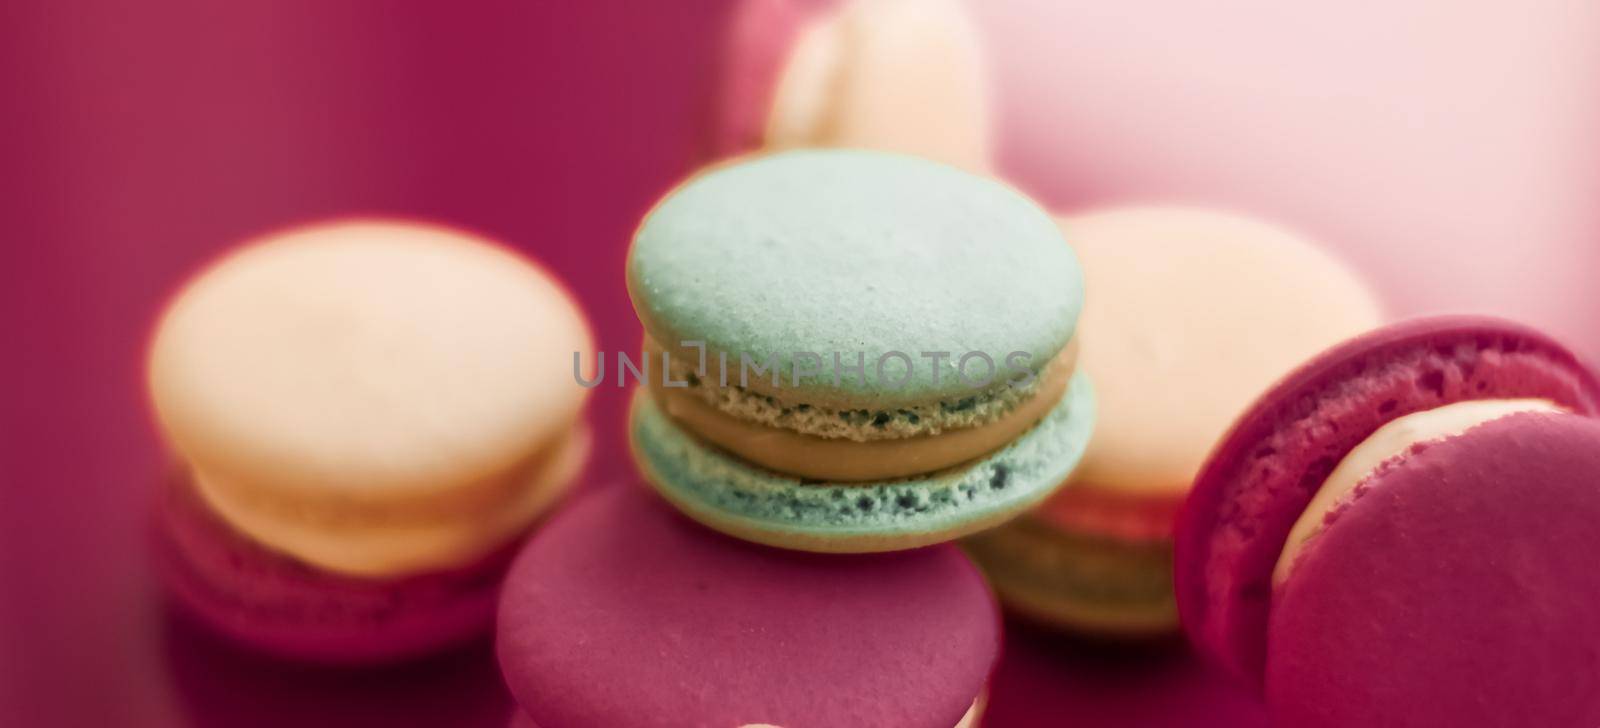 French macaroons on cherry pink background, parisian chic cafe dessert, sweet food and cake macaron for luxury confectionery brand, holiday backdrop design by Anneleven